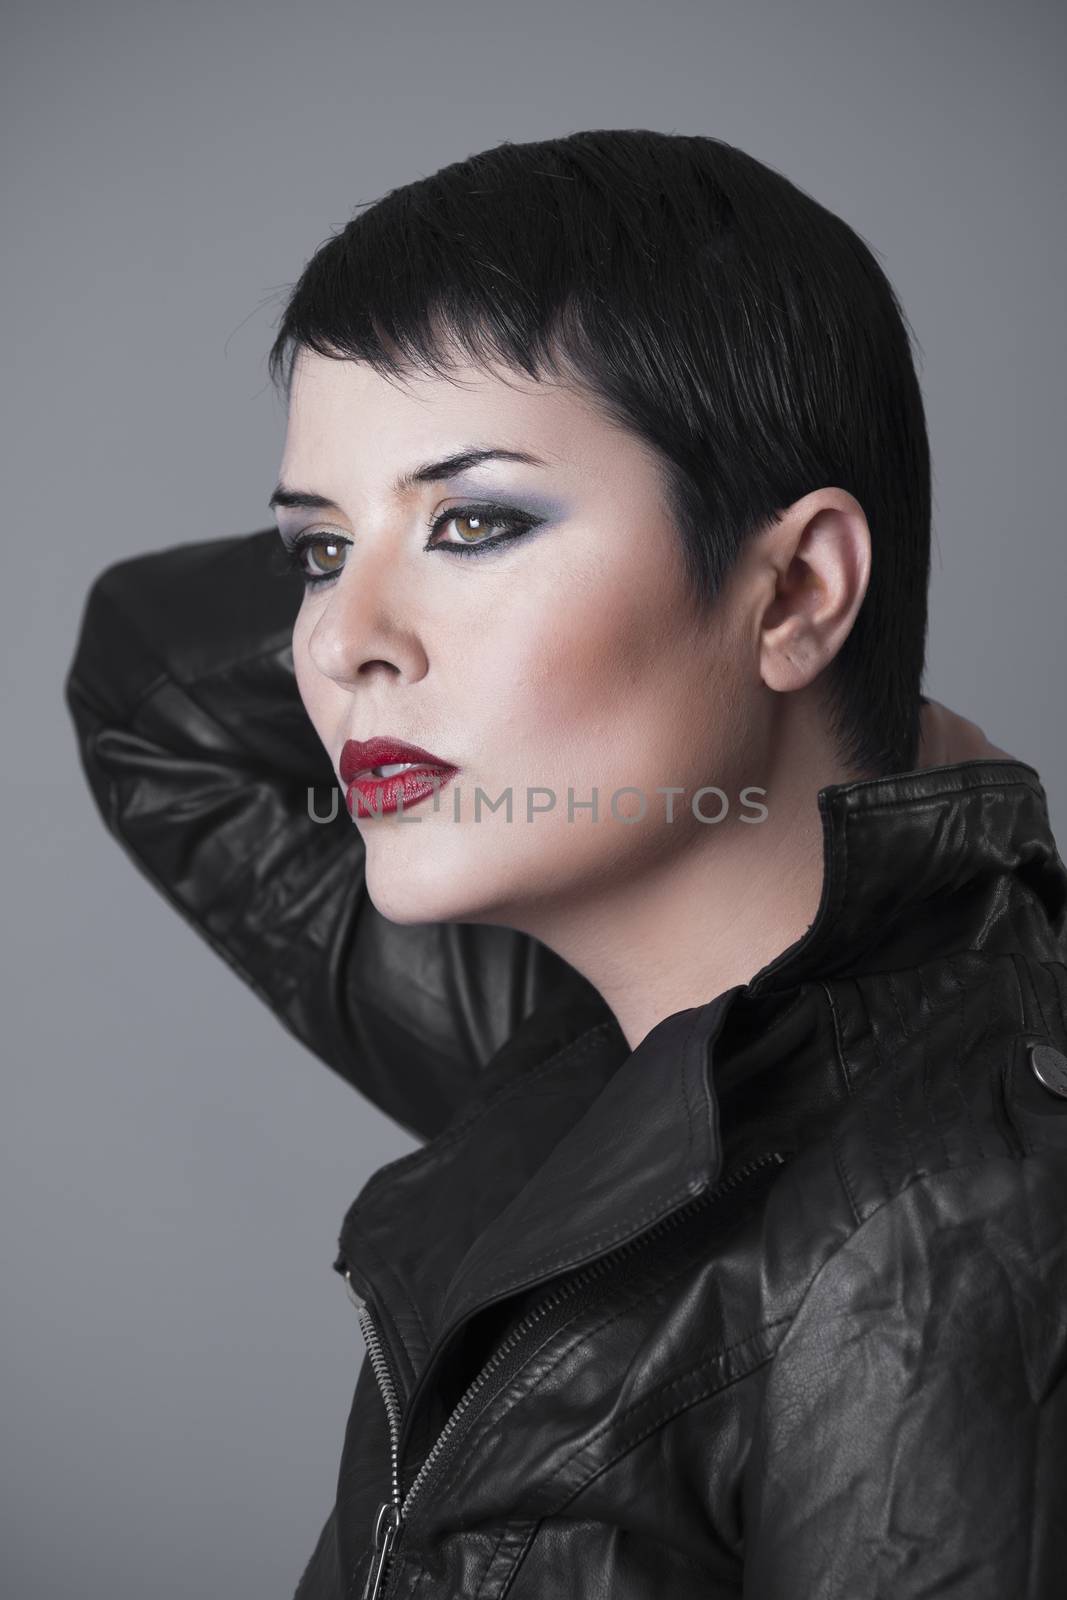 Sexy woman with black leather jacket in his pride hurt women by FernandoCortes